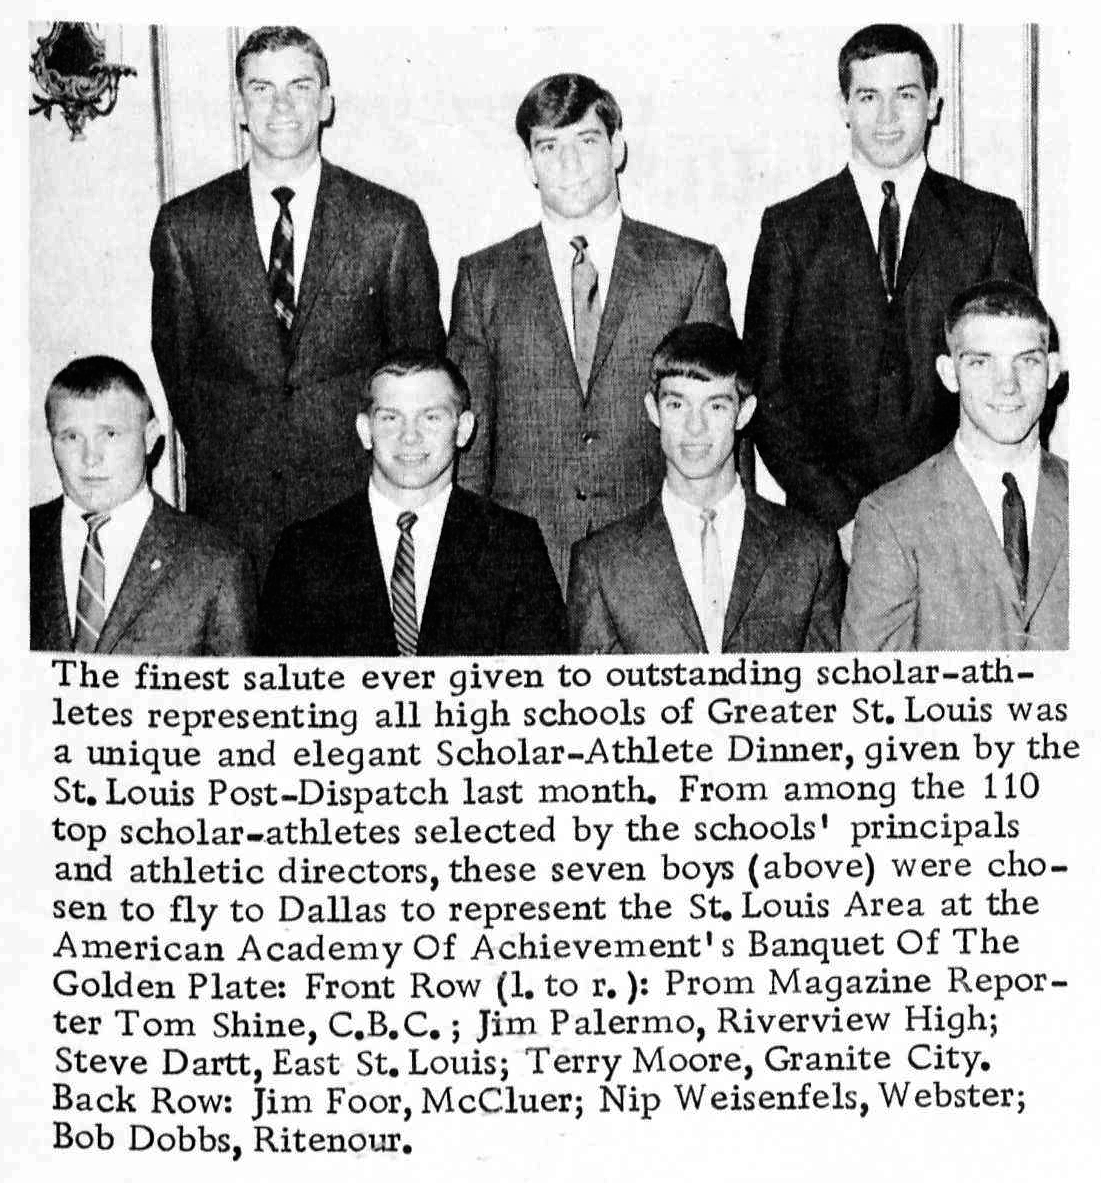 RGHS Senior Jim Palermo was one of seven of 110 St. Louis area scholar-athletes featured in PROM MAGAZINE JULY 1967. 